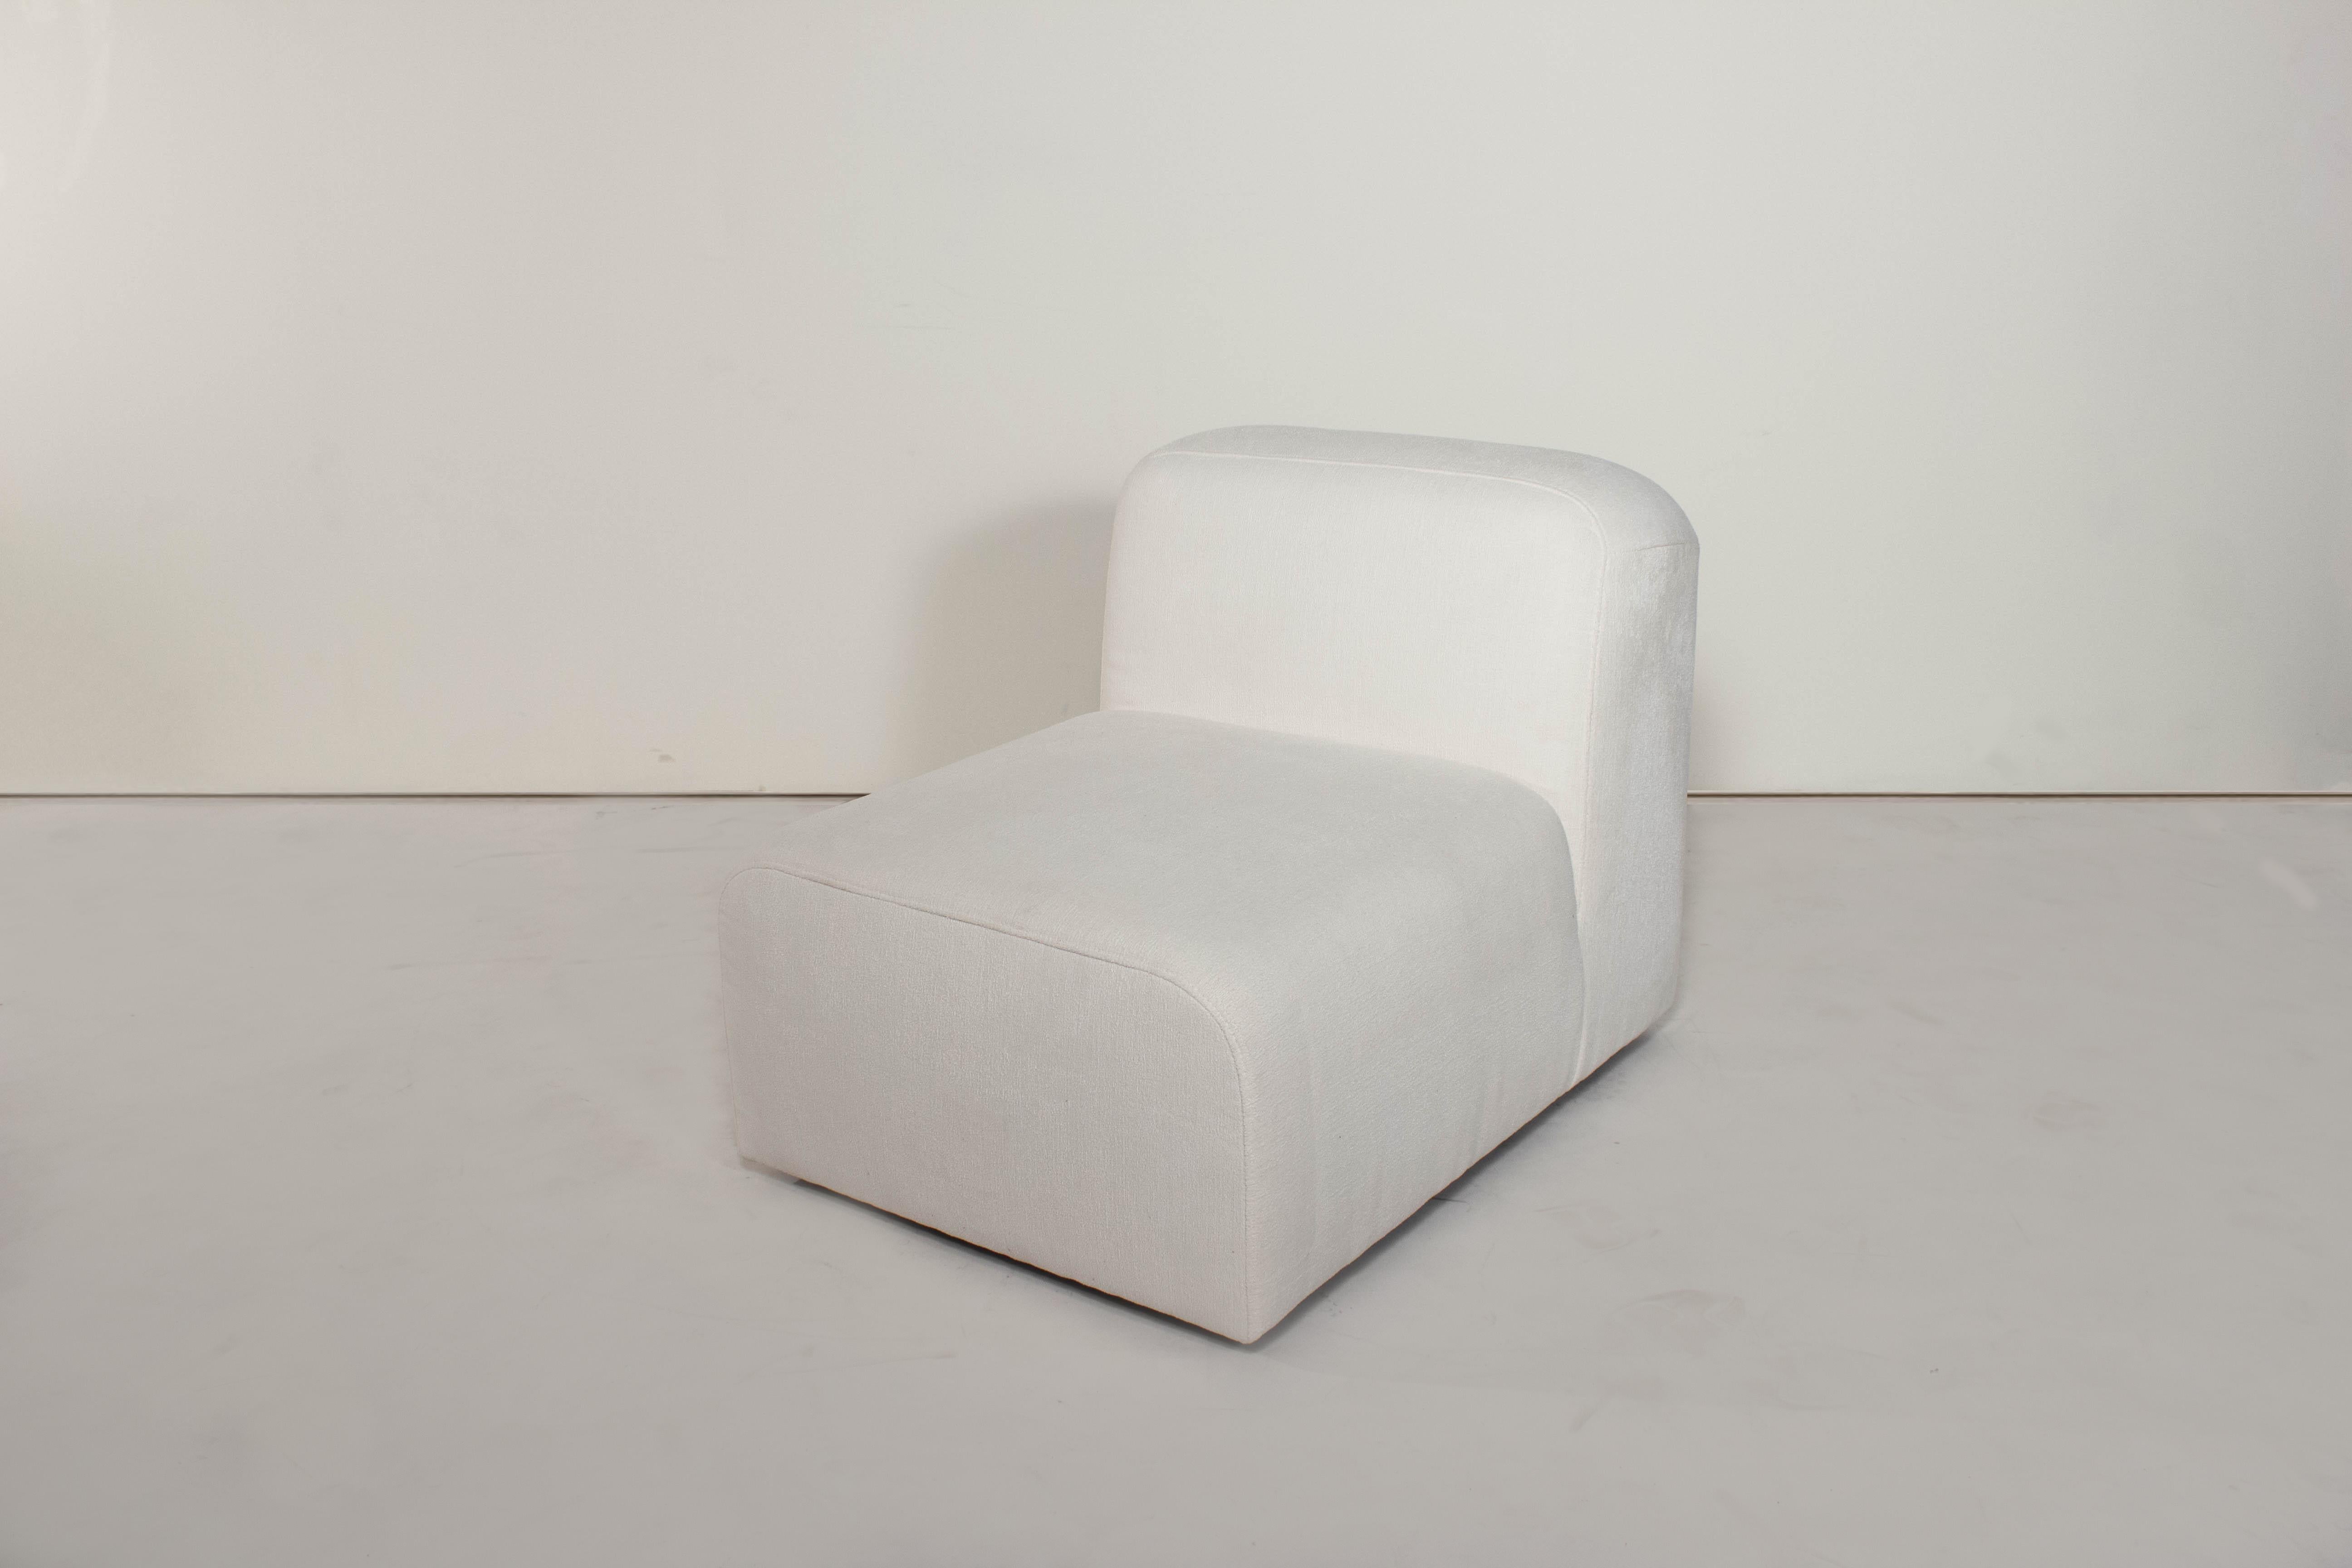 Chinese Yam Sofa by Sun at Six, Minimalist Sofa in Snow For Sale